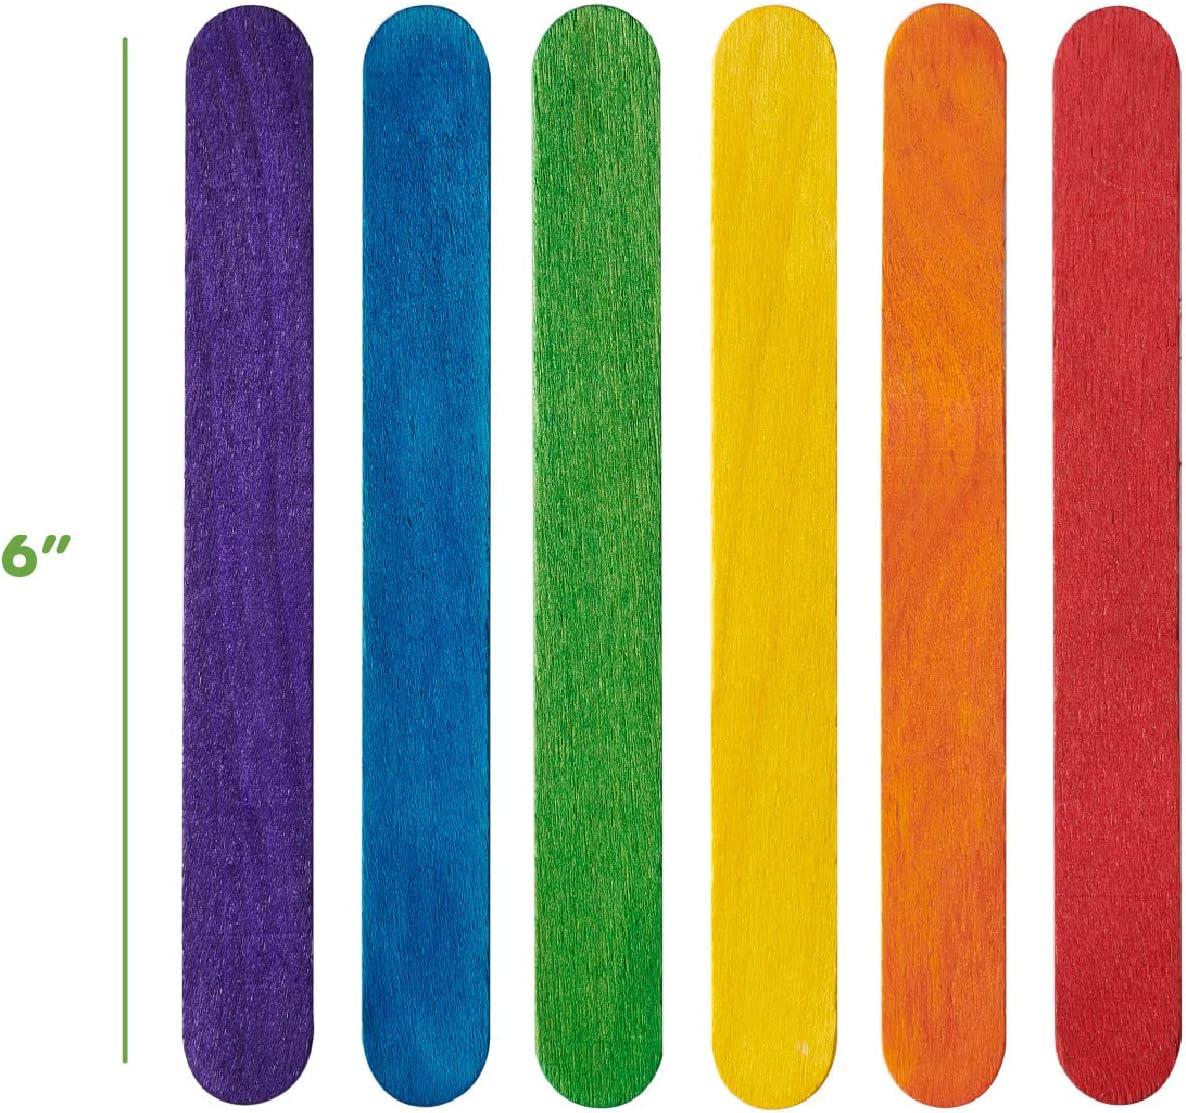 Multicolored Popsicle Sticks in Bulk in Shades of Purple Red Light Blue  Yellow Orange Green for Desktop Background a Stock Image - Image of  multicolored, orange: 195340913